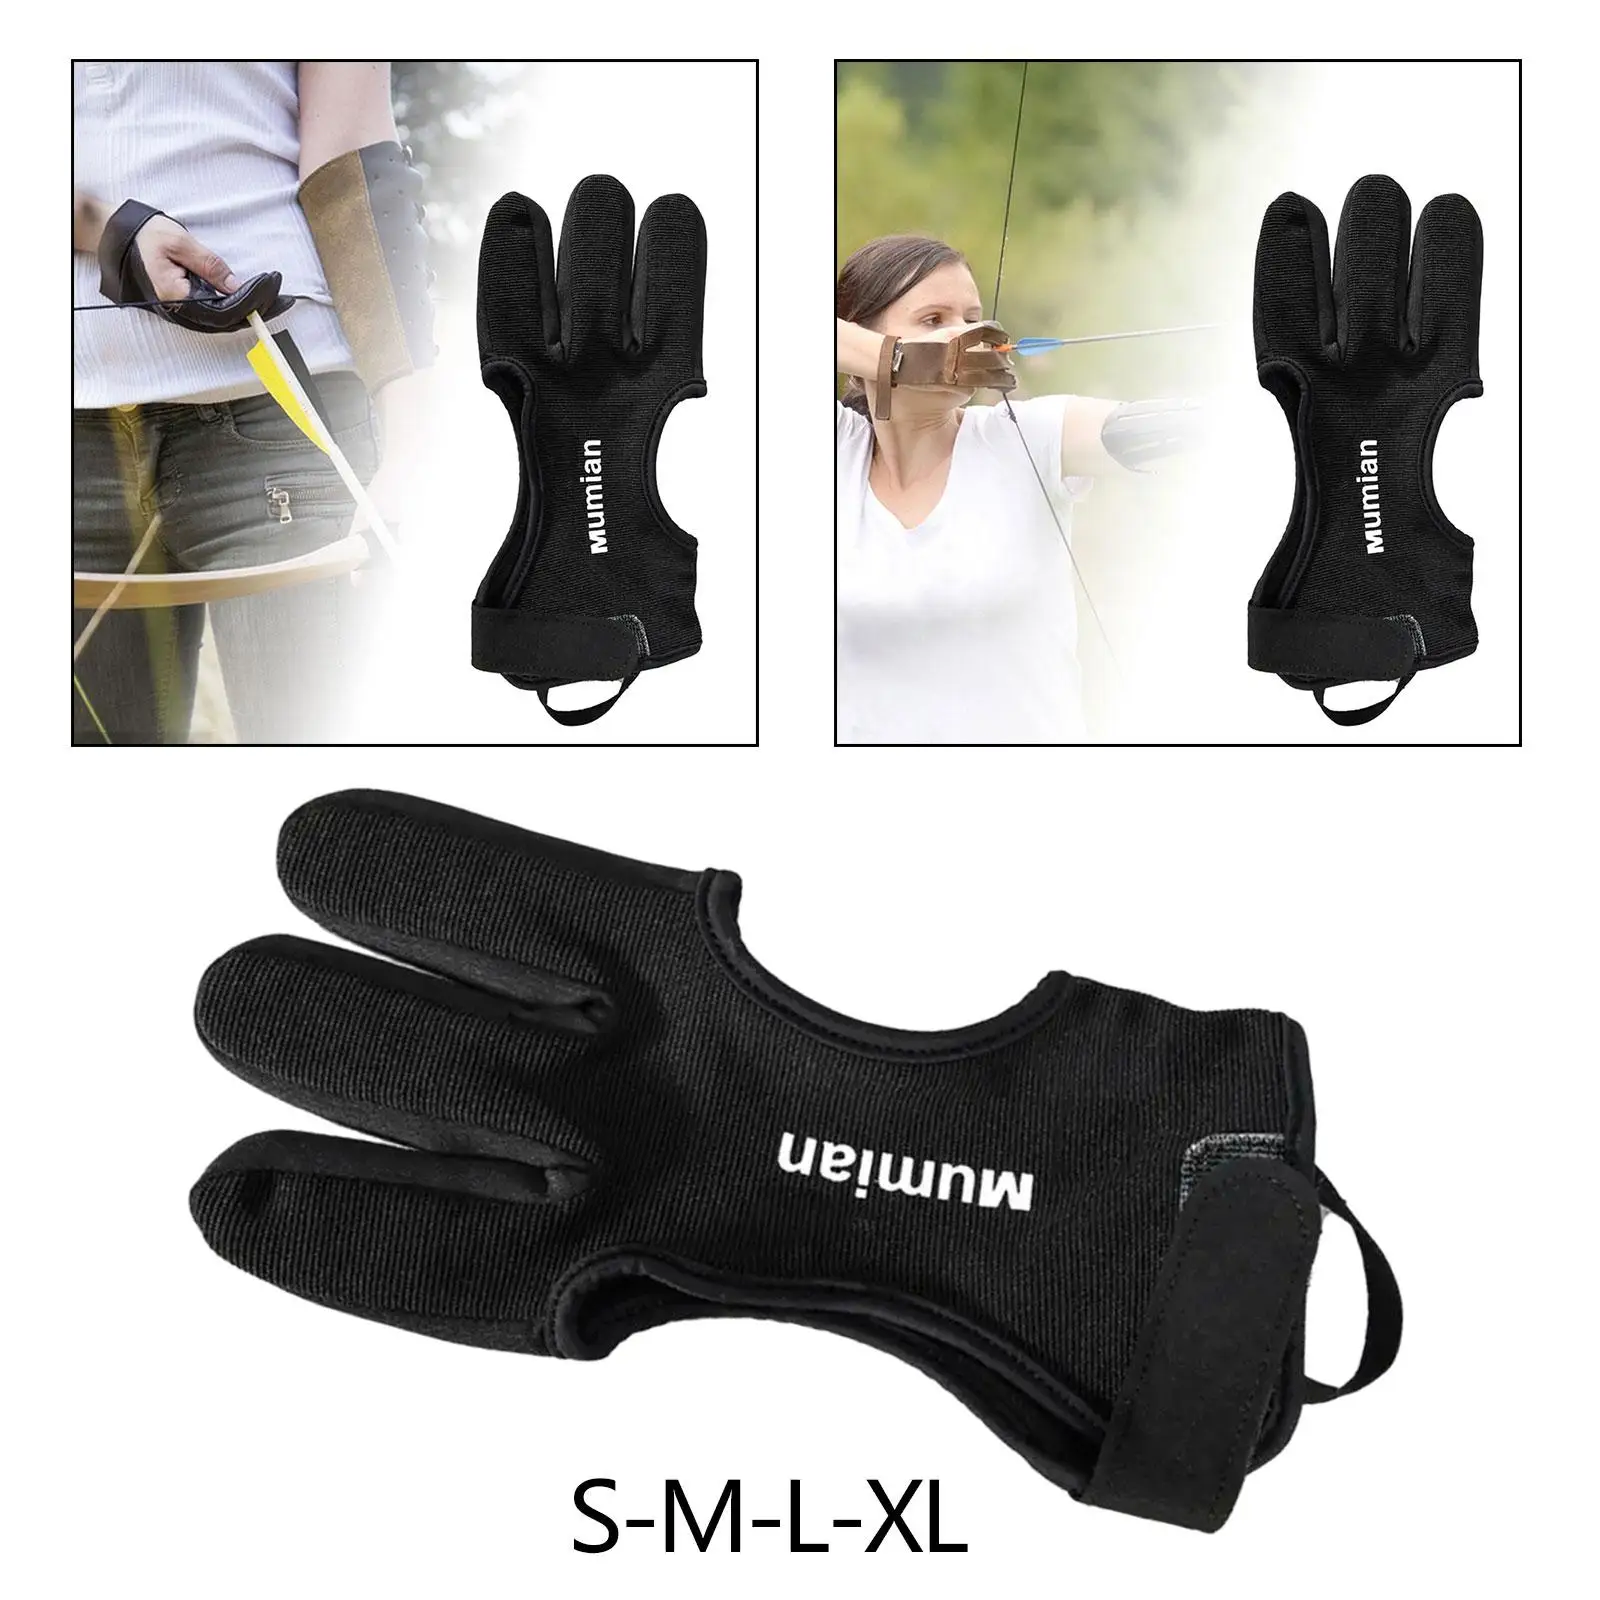 Archery Glove Finger Tab Accessories, PU Leather Tips for Recurve and Compound,